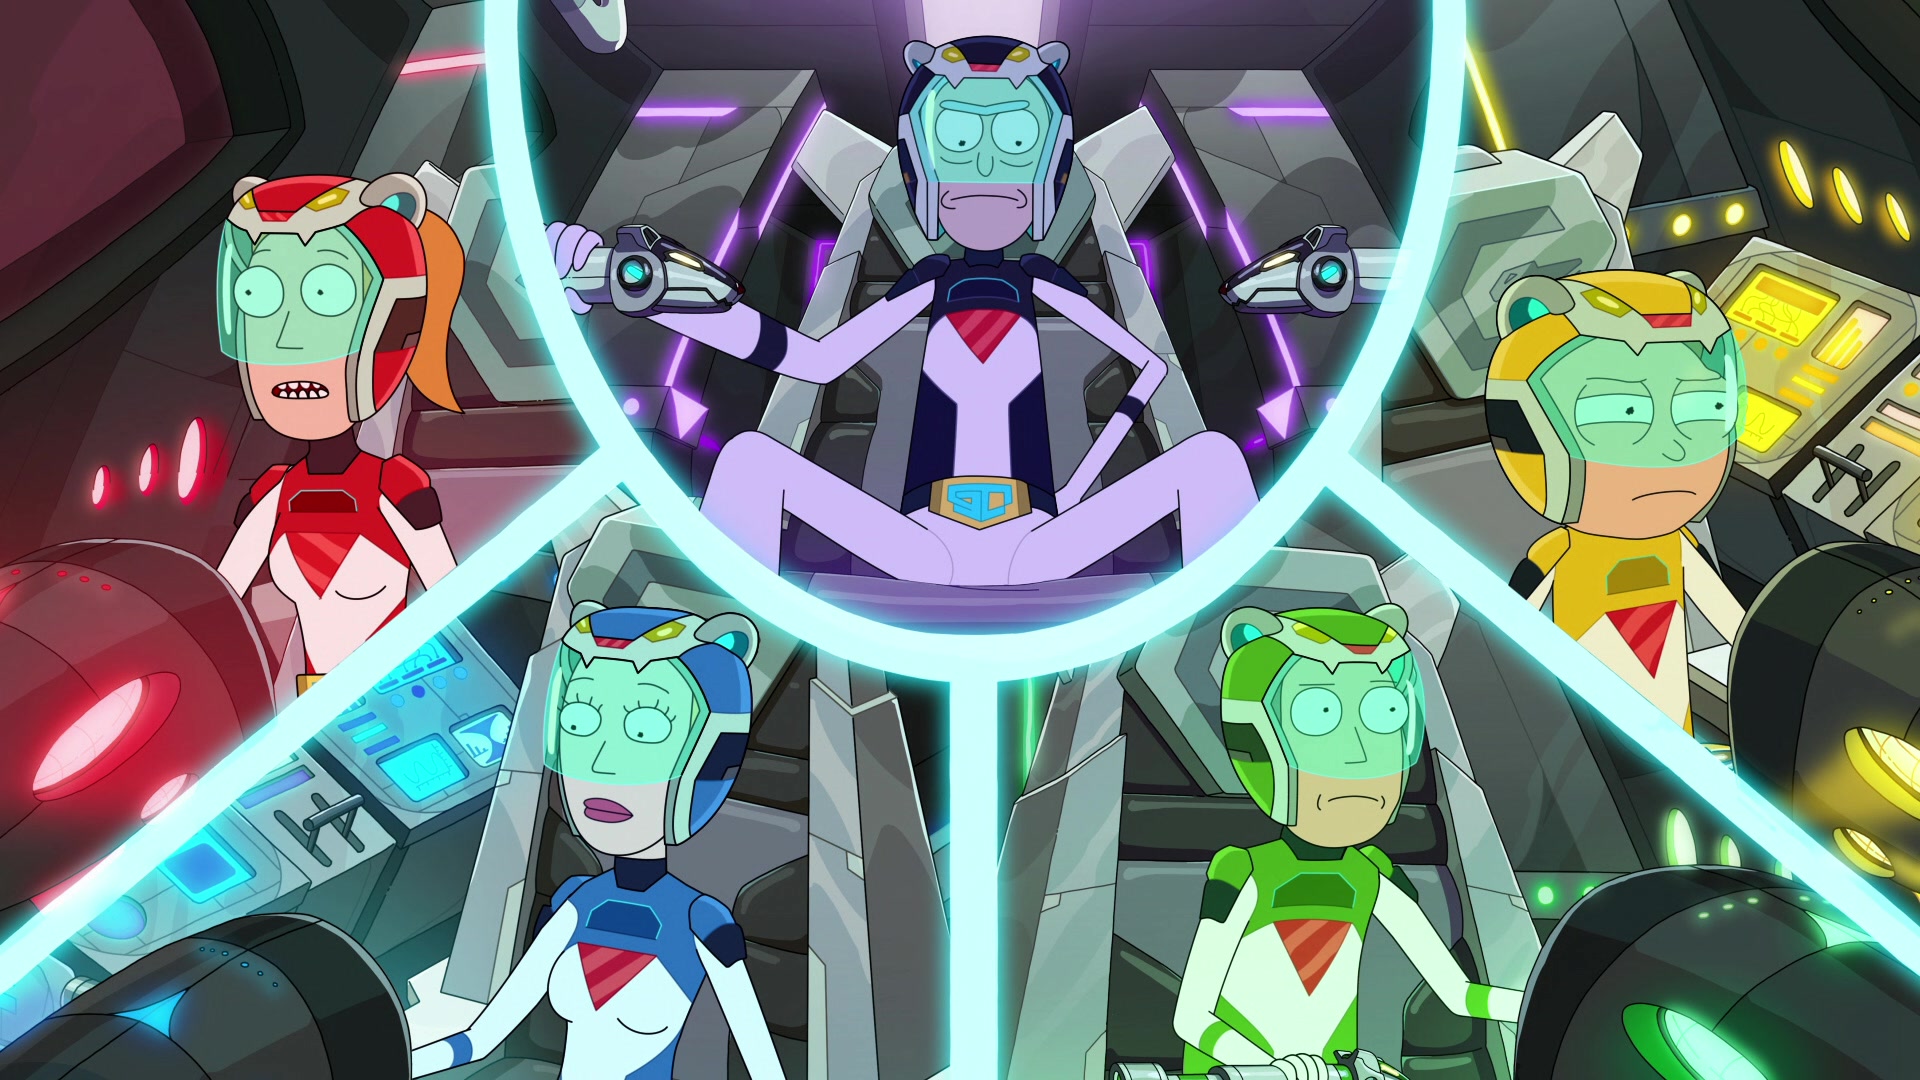 Rick (Justin Roiland), Morty (Justin Roiland), Summer (Spencer Grammer), Jerry (Chris Parnell) and Beth (Sarah Chalke) form Gogotron in Rick and Morty Season 5 Episode 7 "Gotron Jerrysis Rickvangelion" (2021), Adult Swim